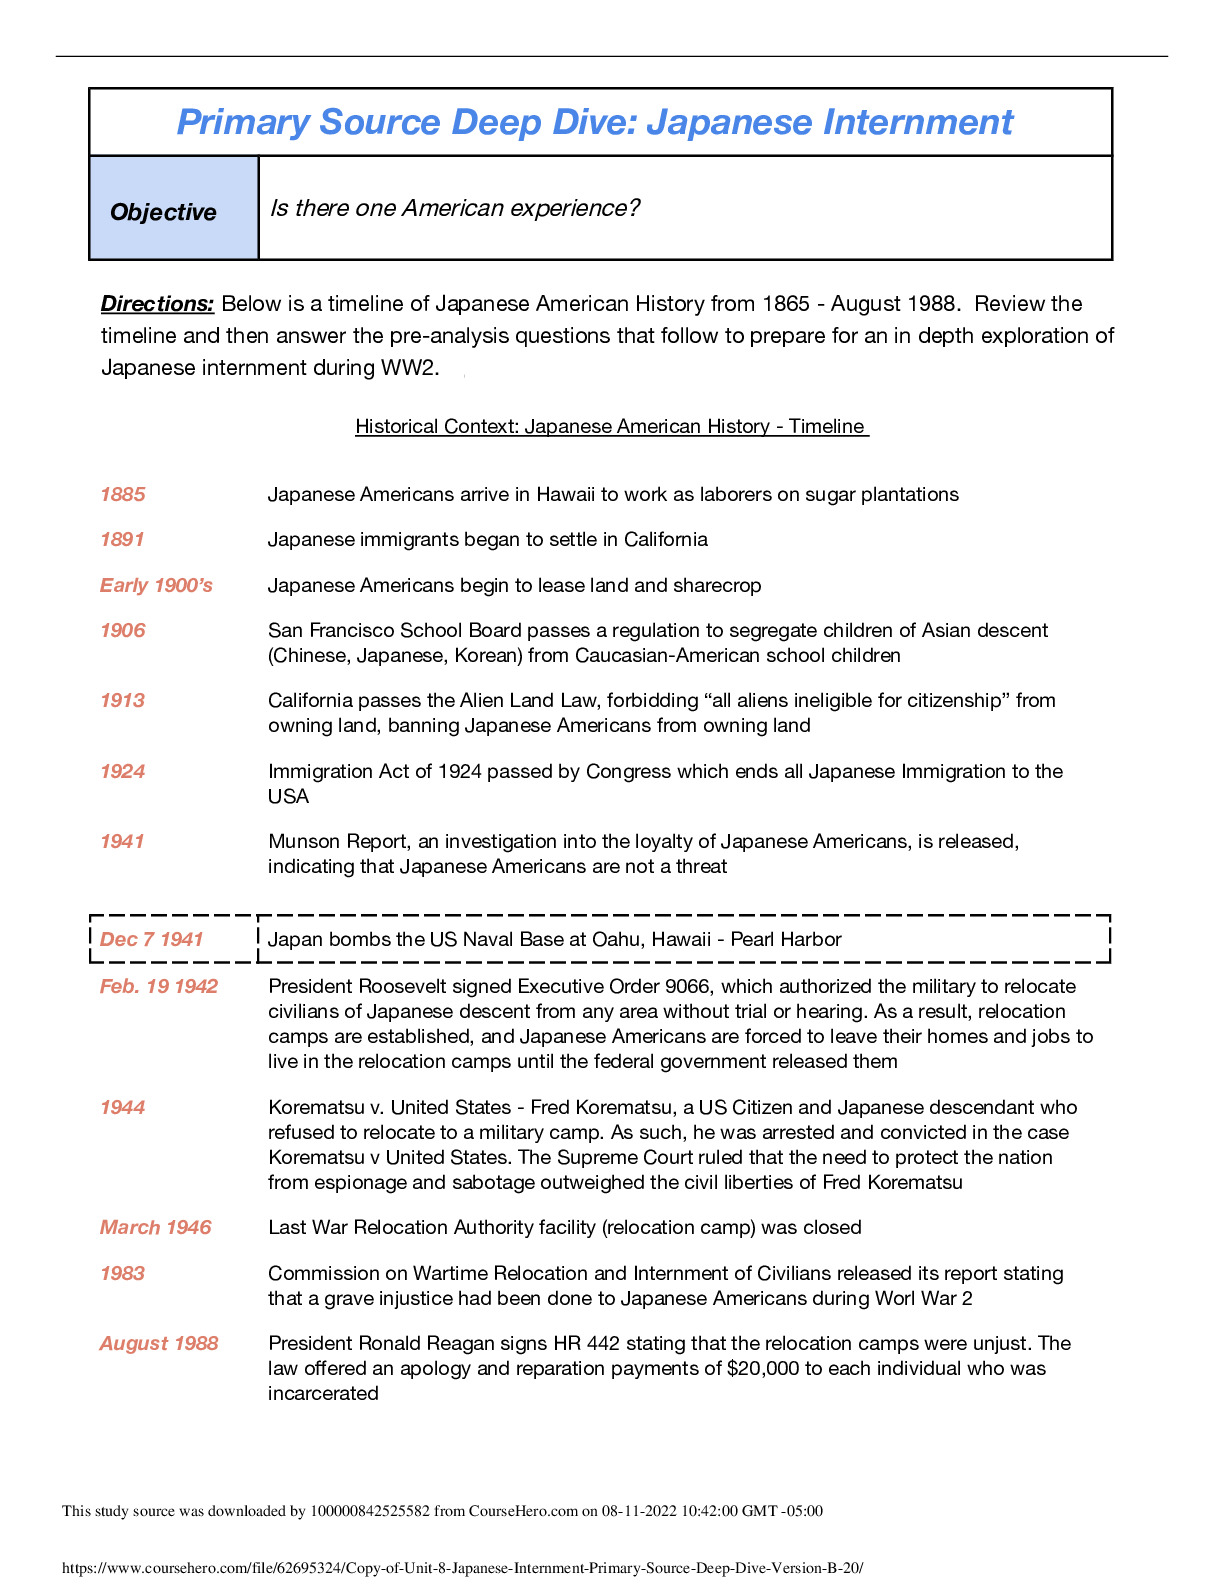 Copy_of_Unit_8_Japanese_Internment_Primary_Source_Deep_Dive_Version_B_2.0